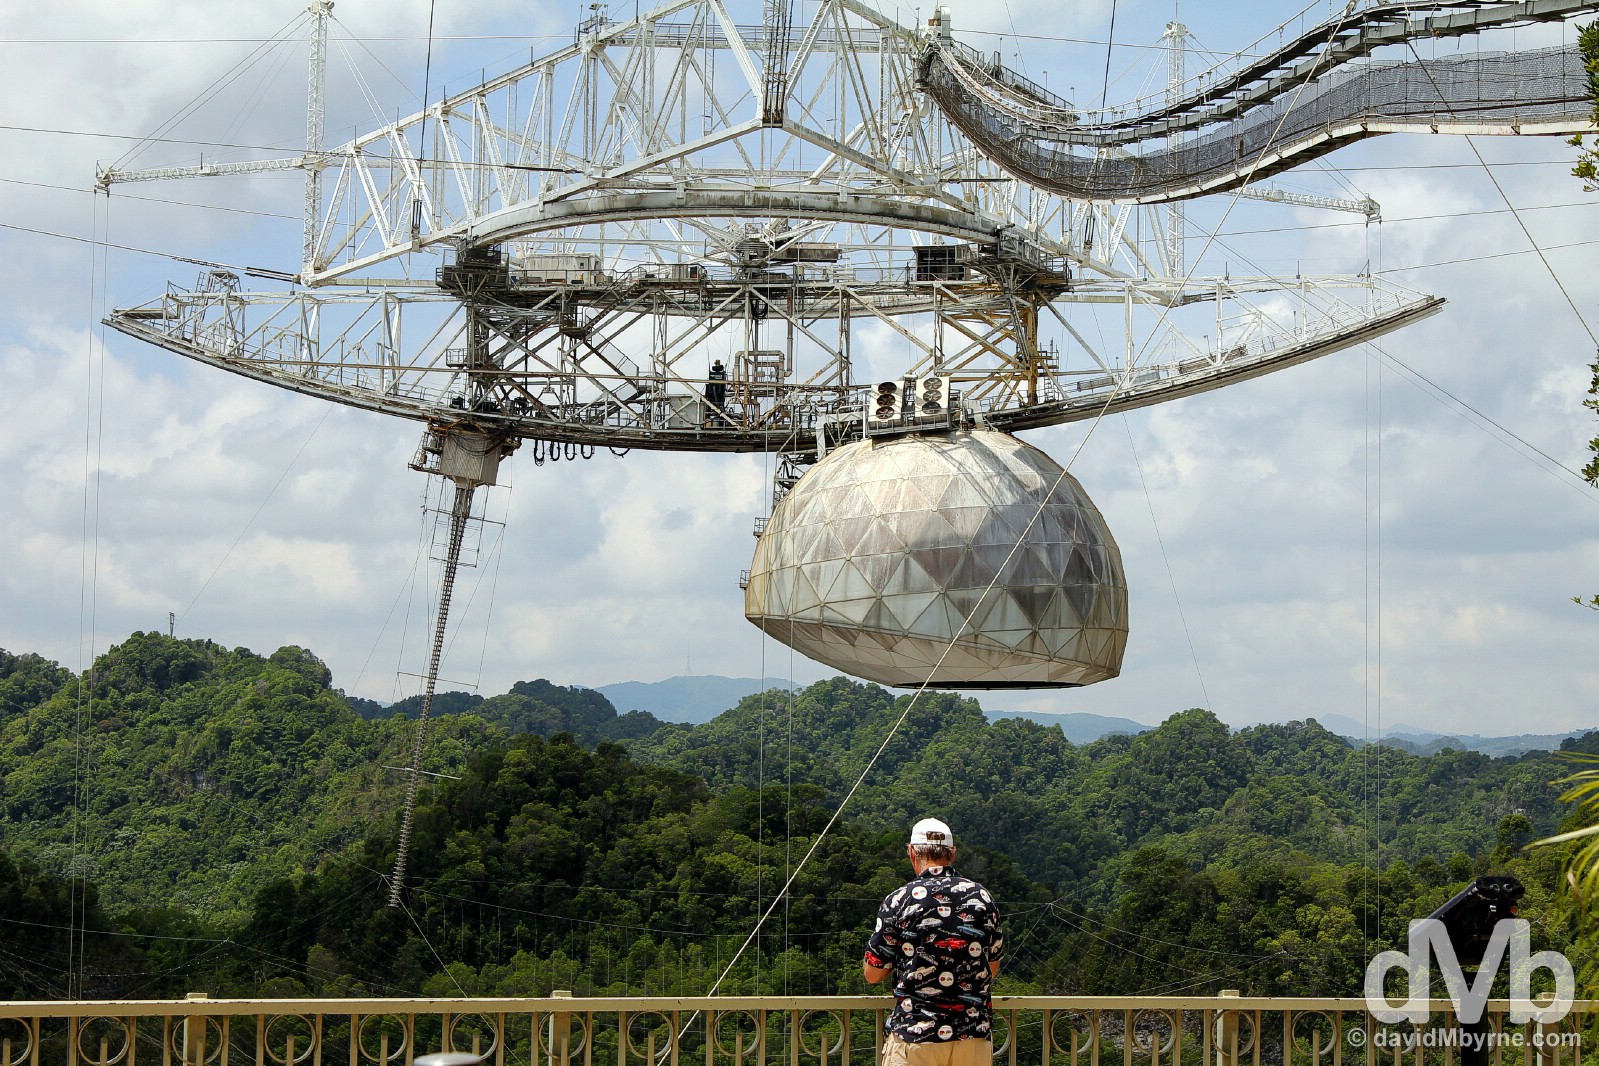 At the Arecibo Observatory, Arecibo, Puerto Rico, Greater Antilles. June 4, 2015.